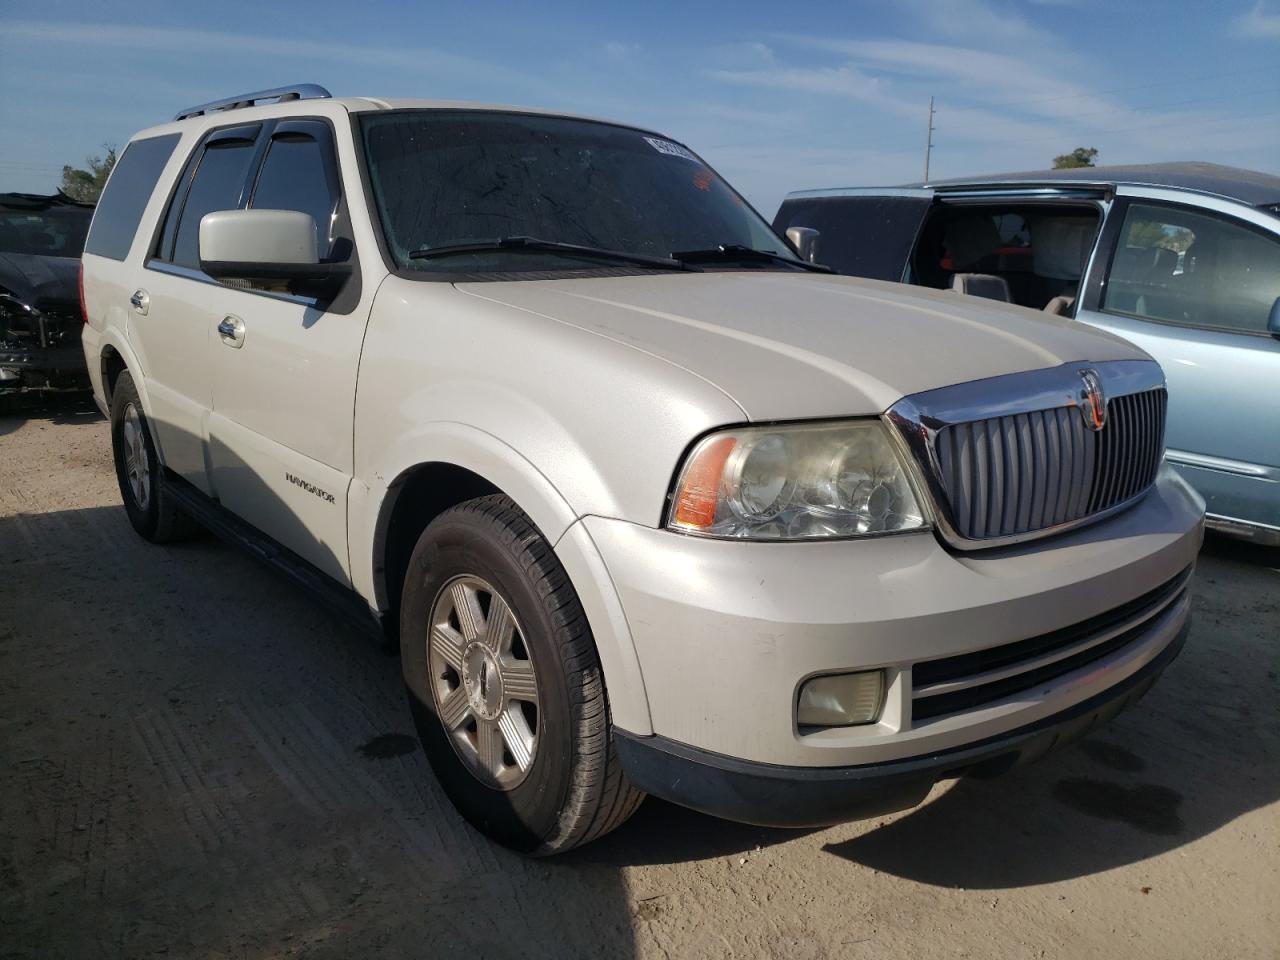 2006 Lincoln Navigator for sale at Copart Riverview, FL Lot #40612*** |  SalvageReseller.com